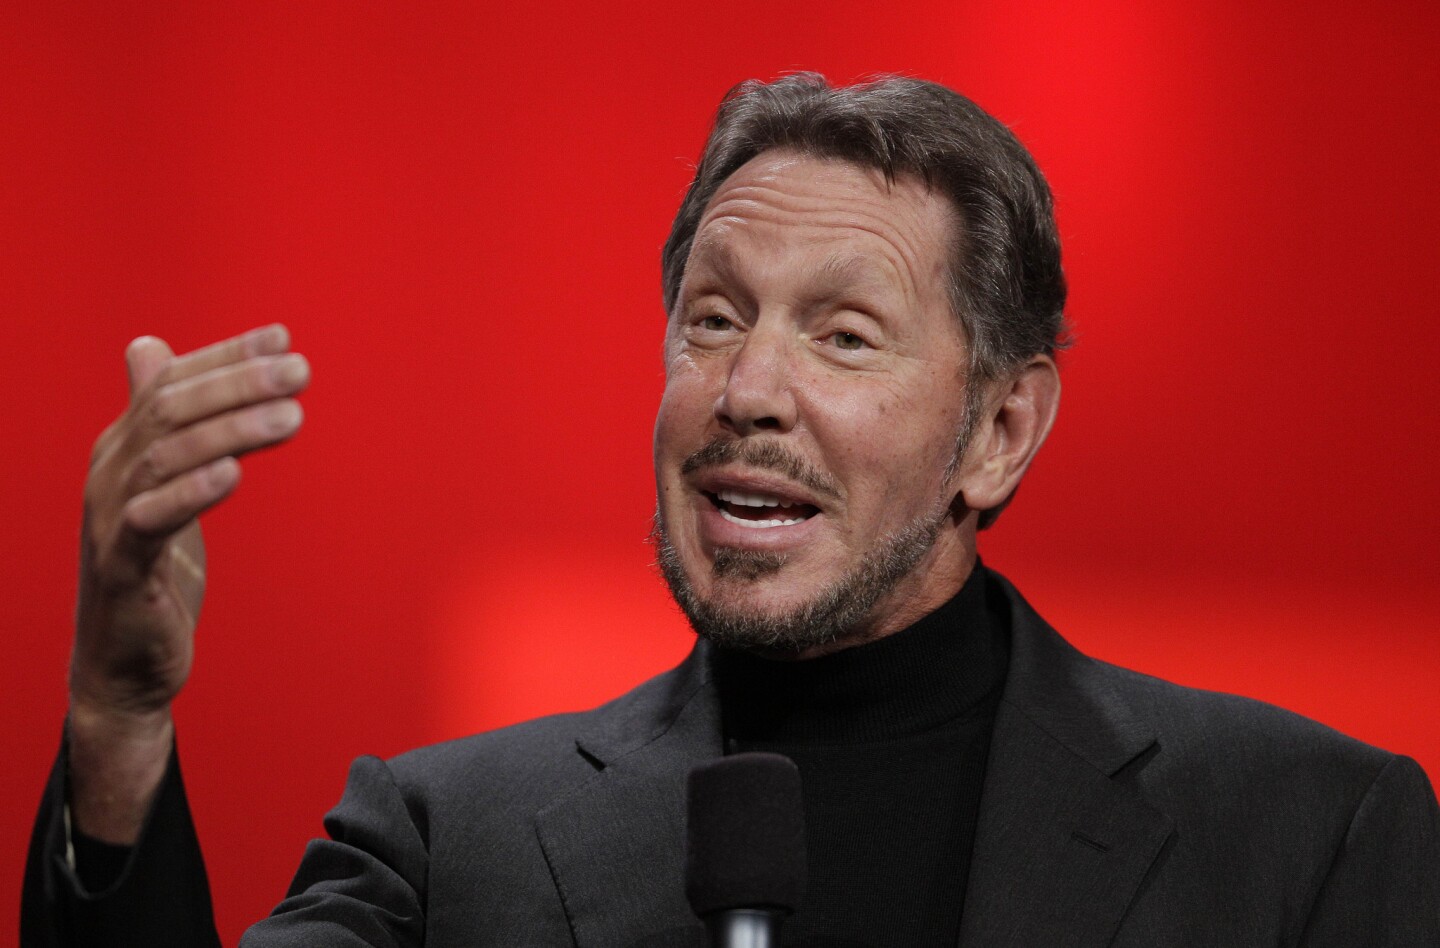 Oracle CEO Larry Ellison was ranked No. 5 on the 2015 Forbes Billionaires List with a net worth of $54.3 billion.